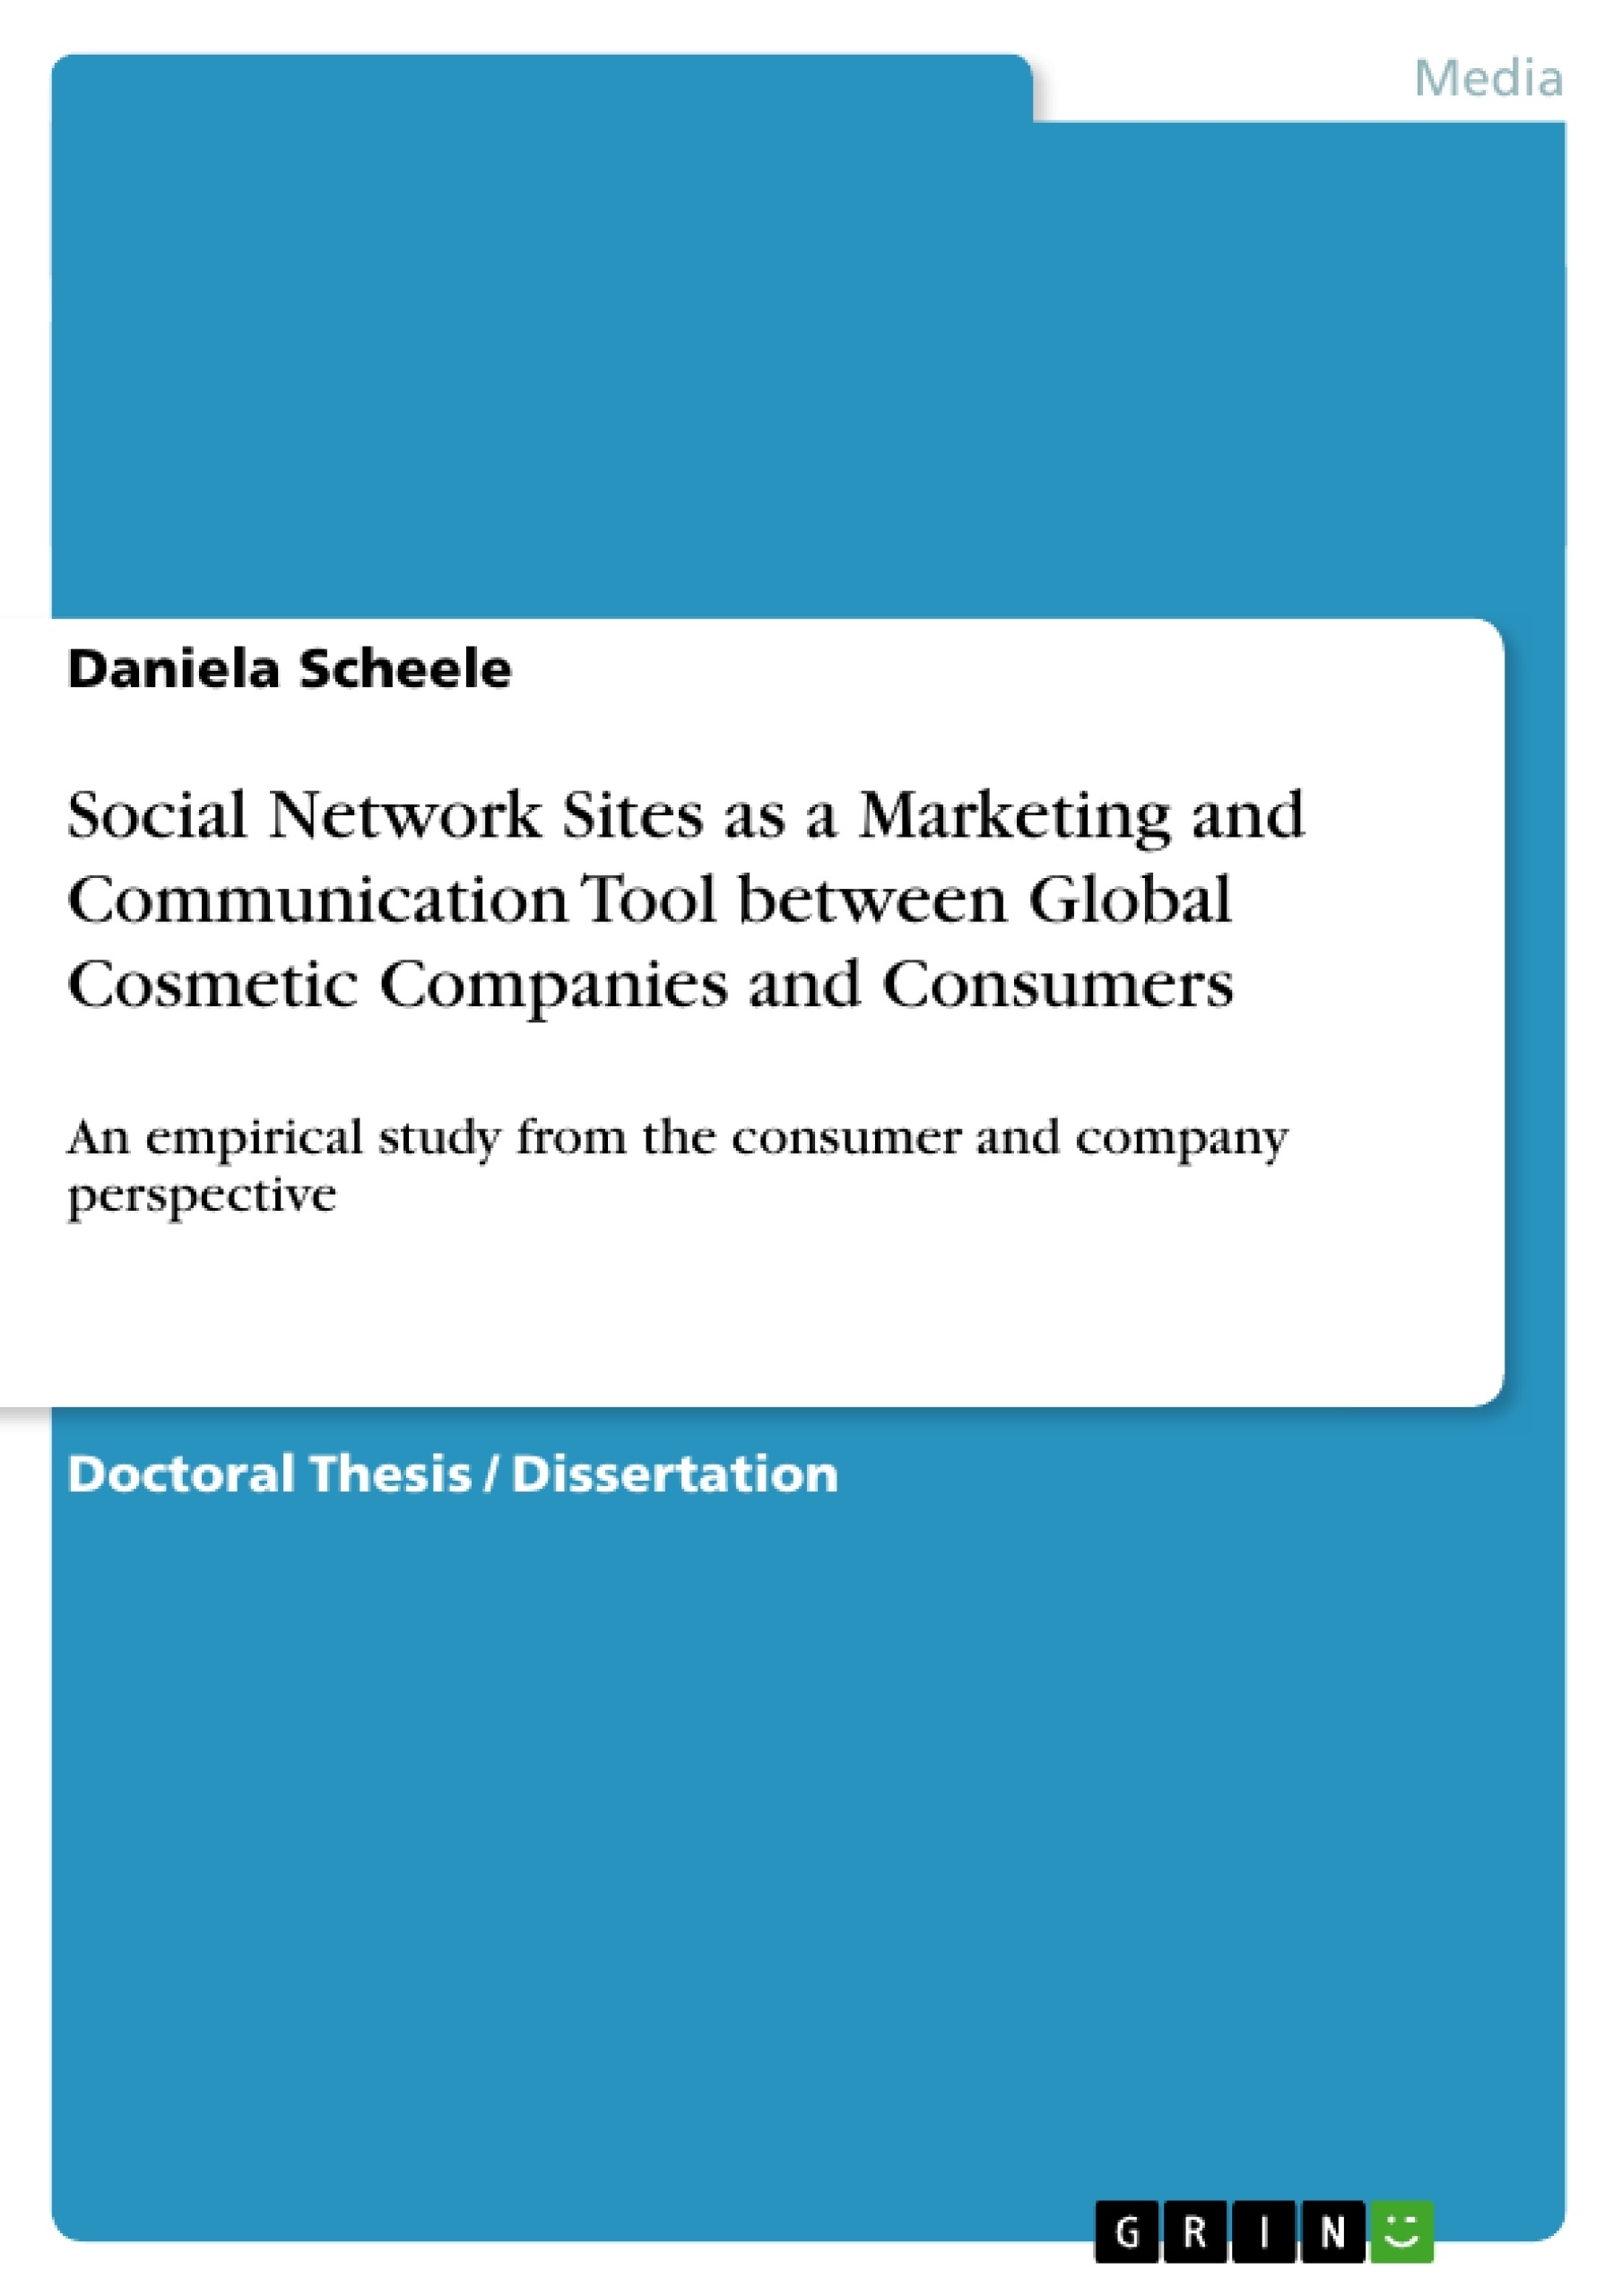 Titre: Social Network Sites as a Marketing and Communication Tool between Global Cosmetic Companies and Consumers